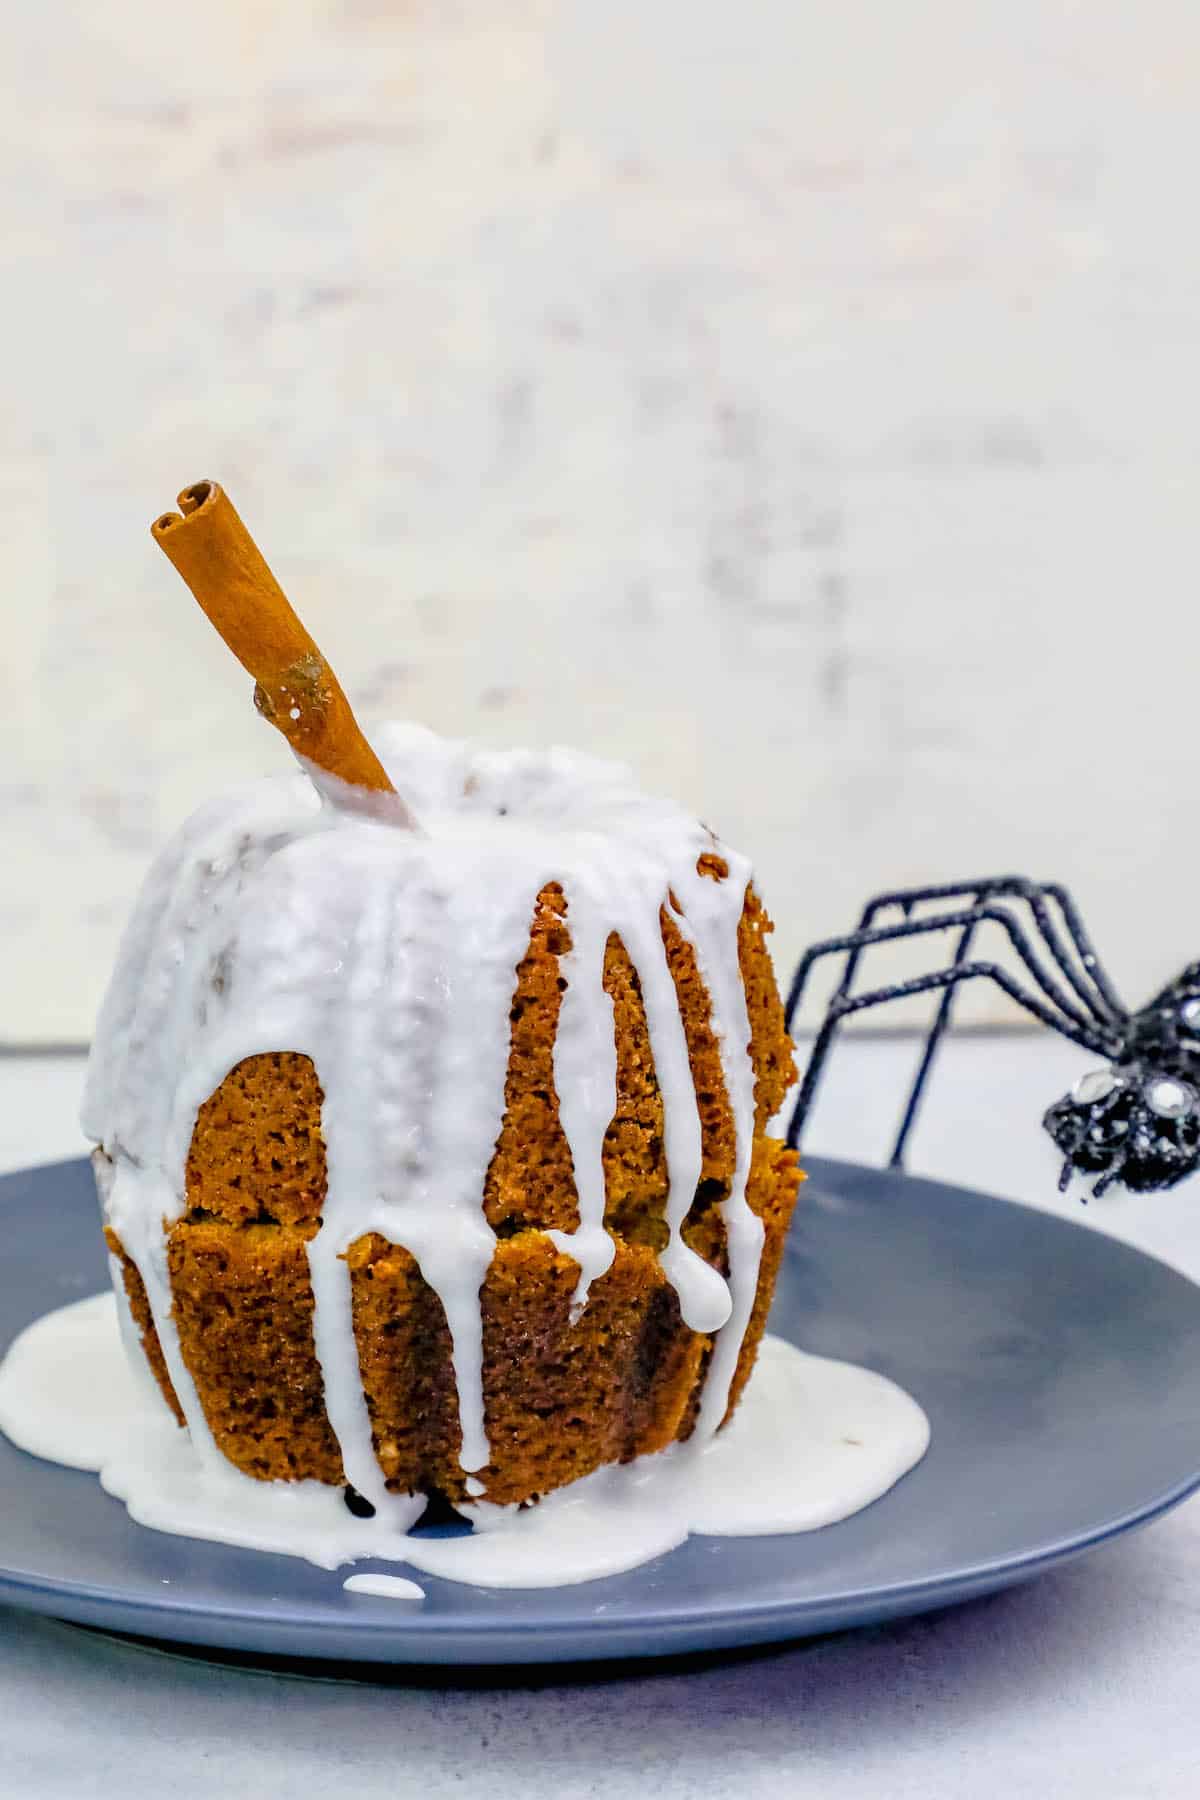 pumpkin Bundt cake together with cinnamon stick in it and white glaze